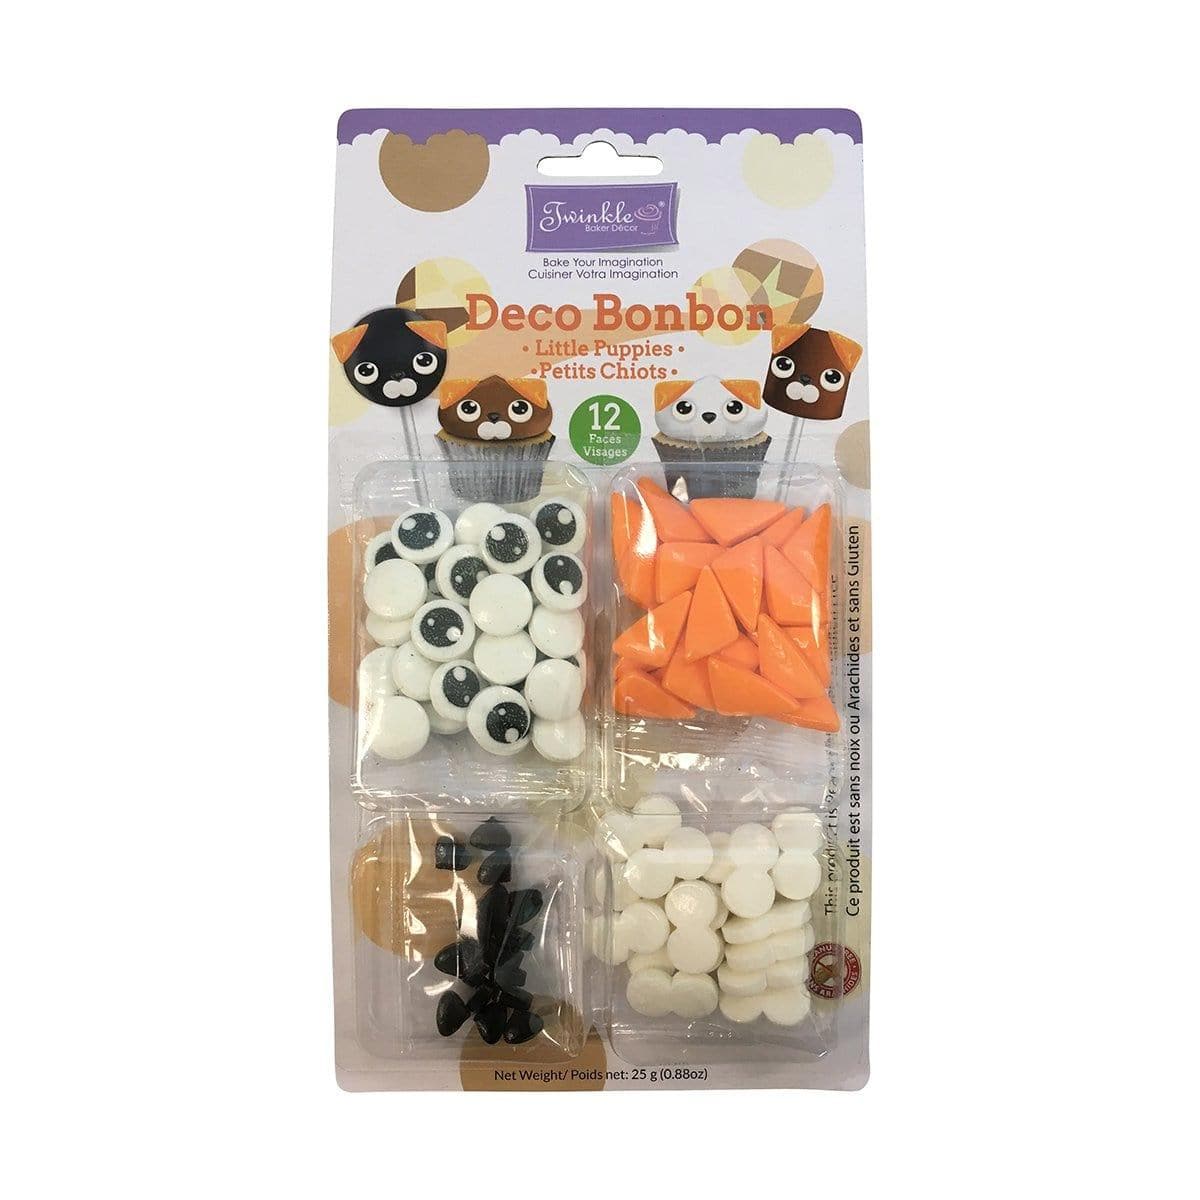 Buy Cake Supplies Deco. Candy 25g - Puppies sold at Party Expert